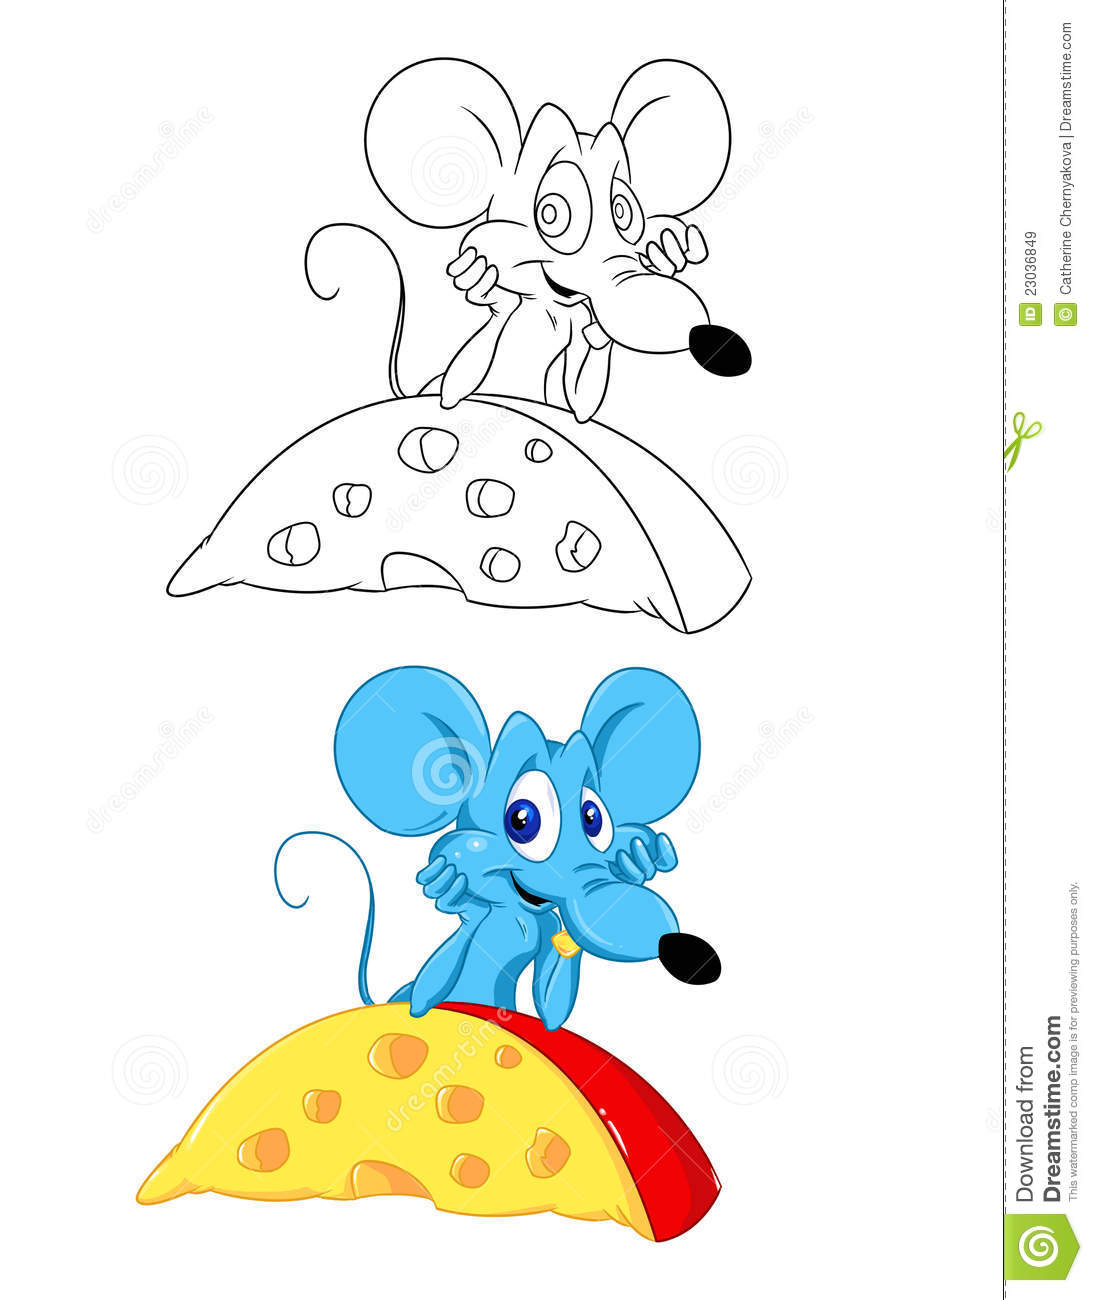 Royalty Free Stock Images  Mouse And Cheese Cartoon  Image  23036849